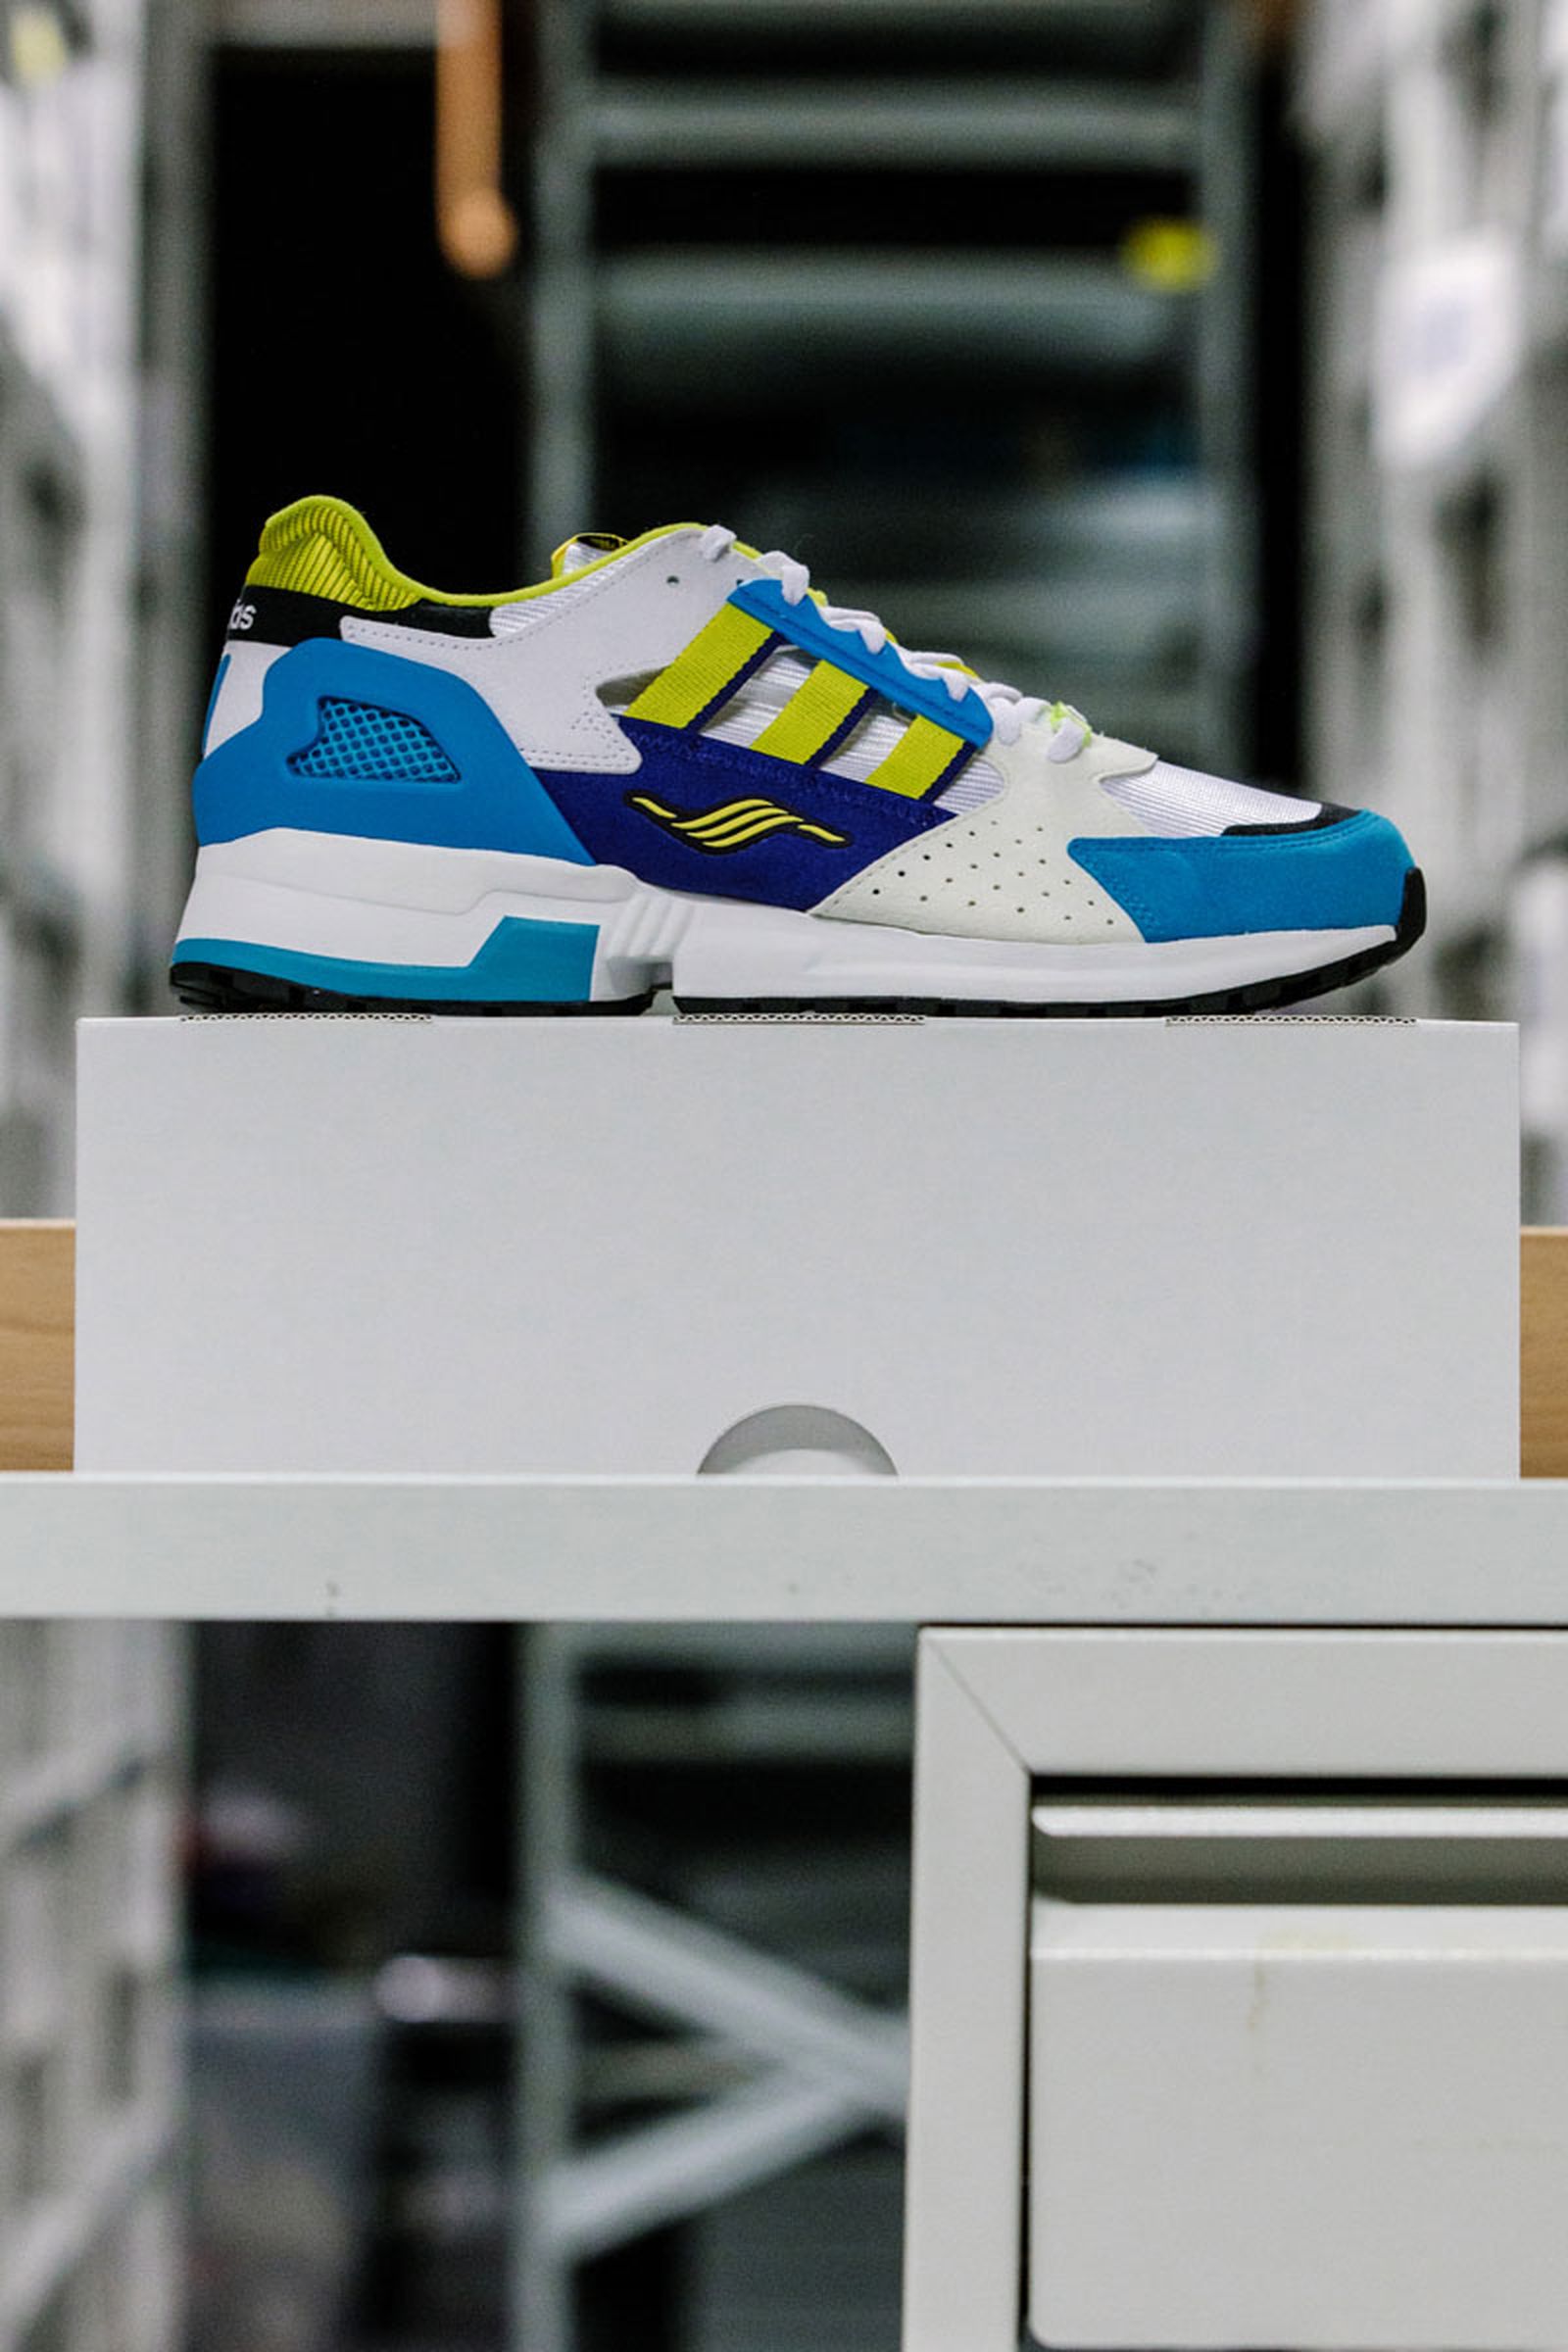 A Brief History of the adidas ZX: Innovation, Collabs & Raves